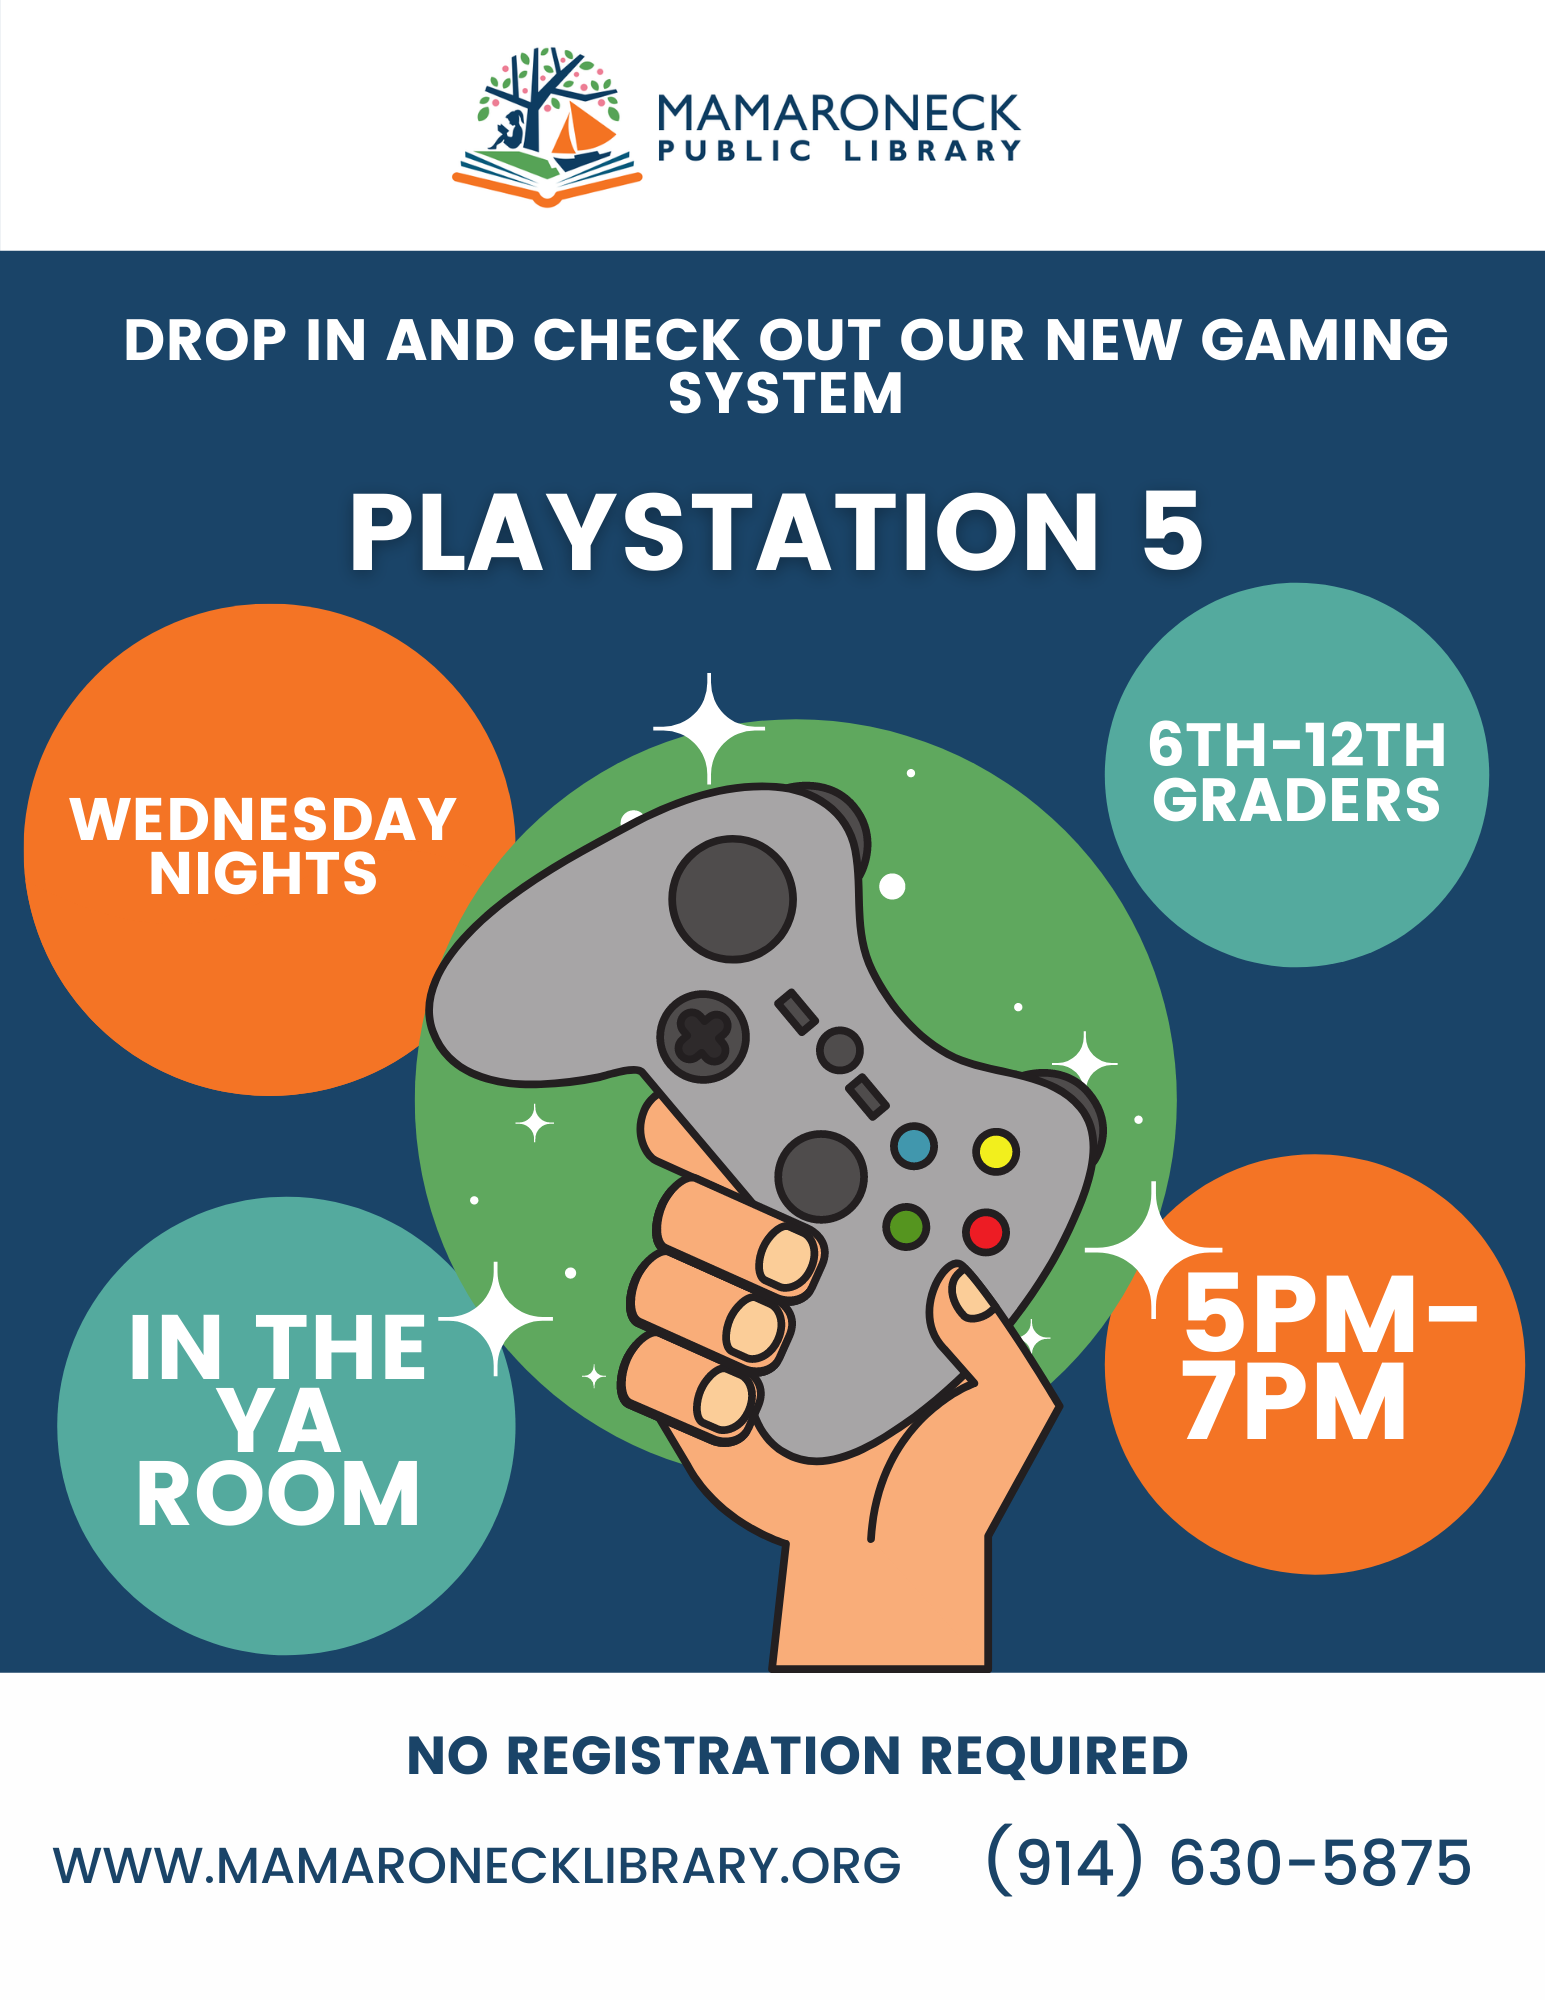 Playstation 5 every Wednesday night 5 - 7pm in the YA room